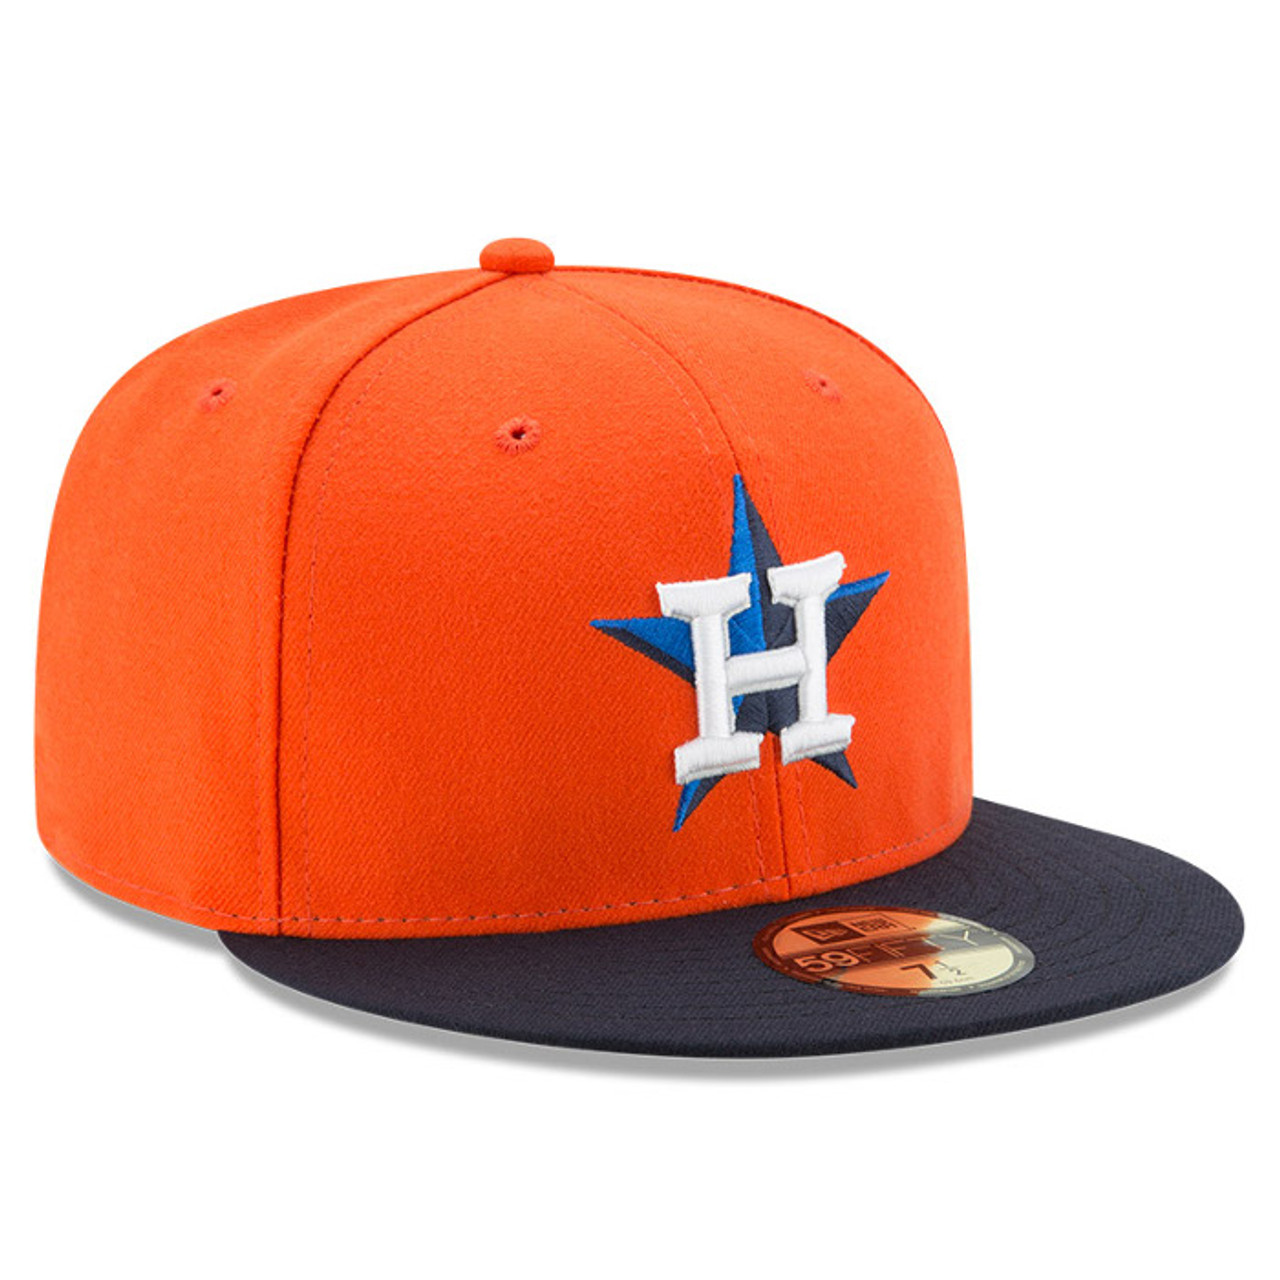 Youth New Era Houston Astros Alternate 59FIFTY AC Fitted Cap